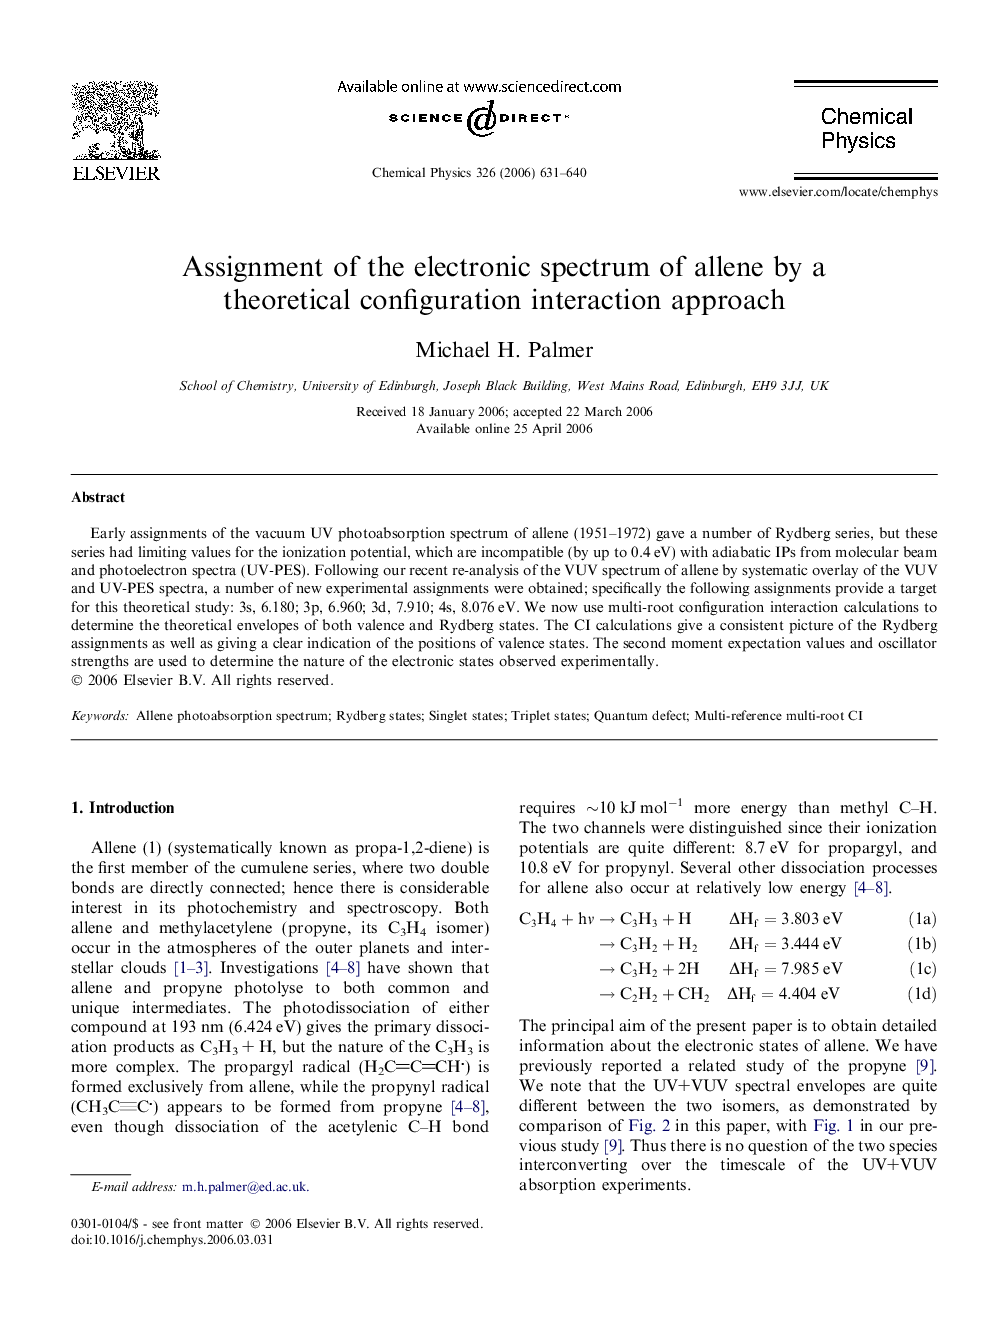 Assignment of the electronic spectrum of allene by a theoretical configuration interaction approach